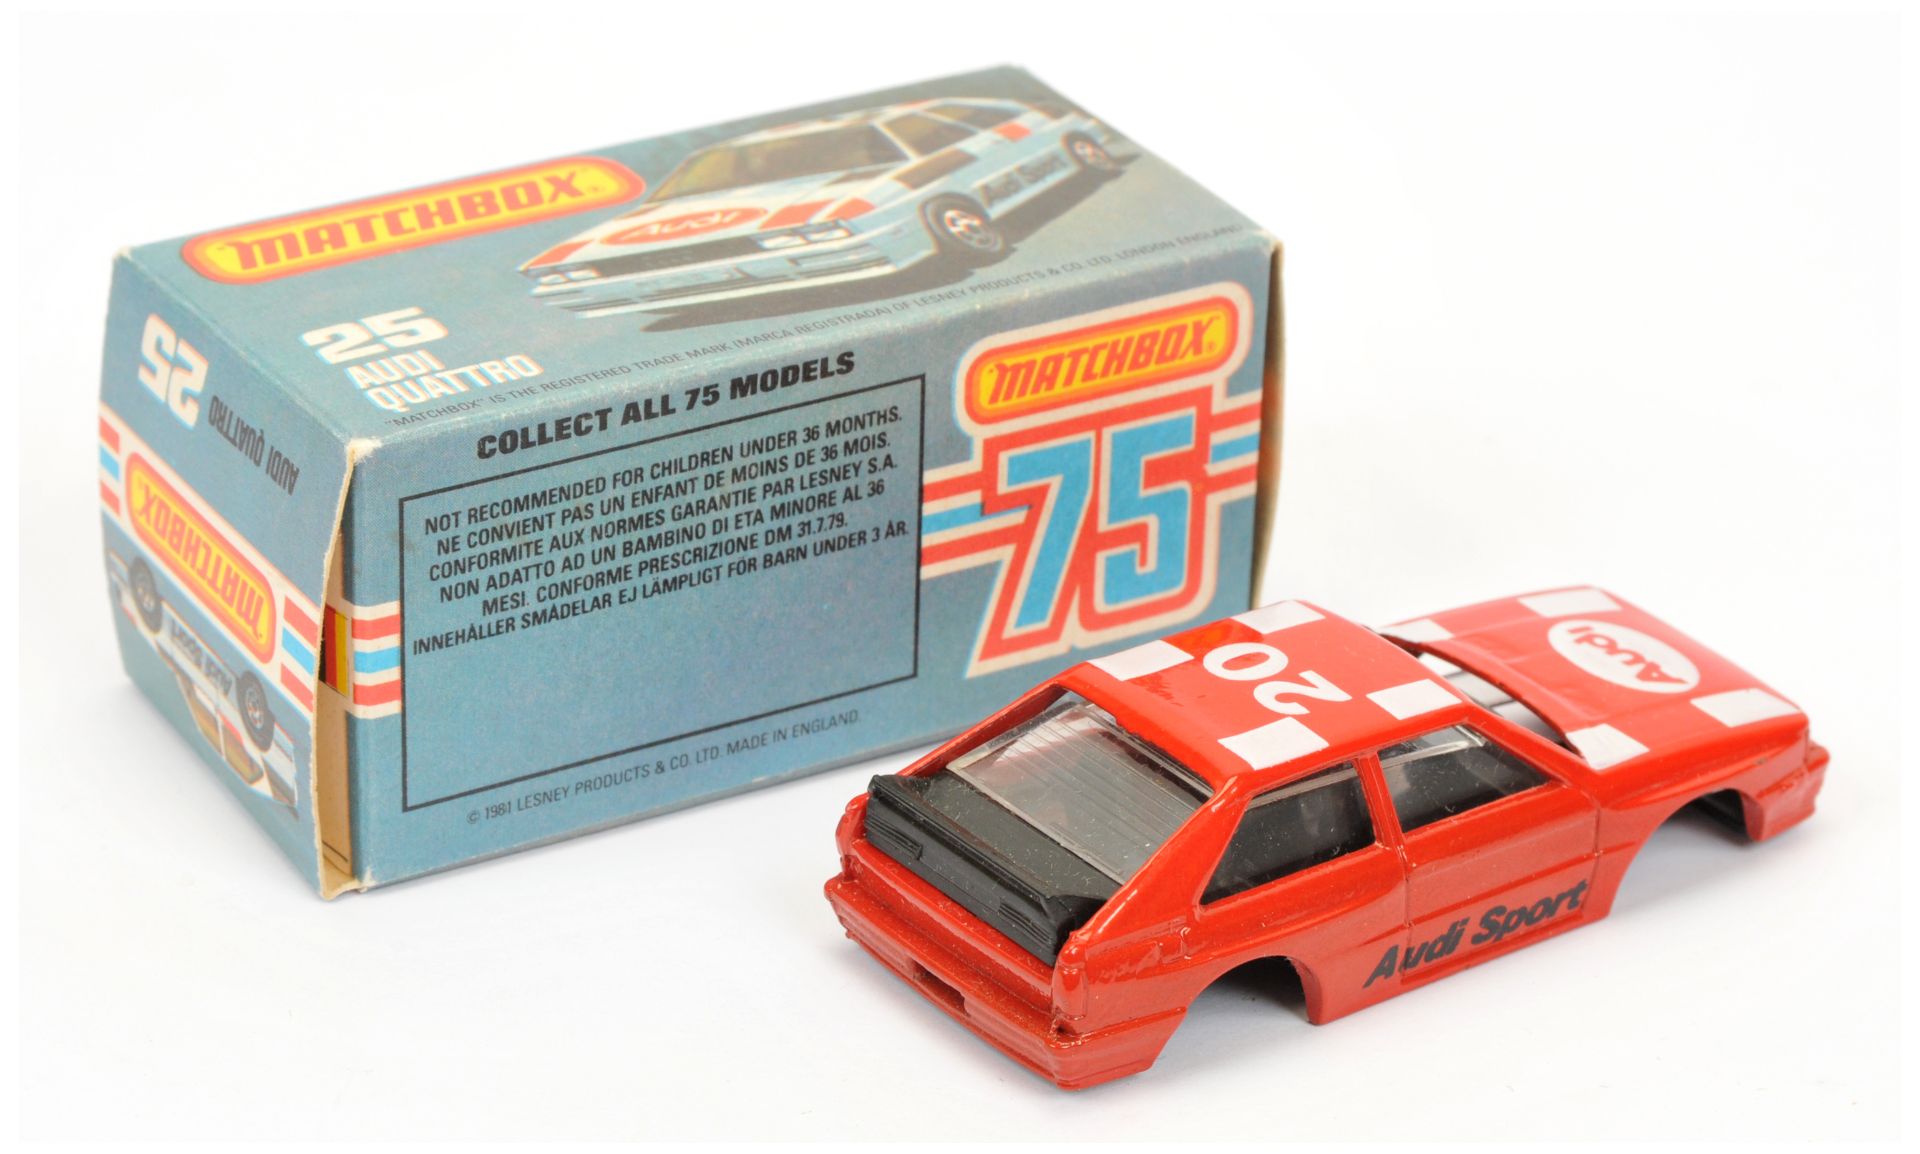 Matchbox Superfast 25d Audi Quattro - Made in Brazil Model - red body with white racing number 20... - Bild 2 aus 3